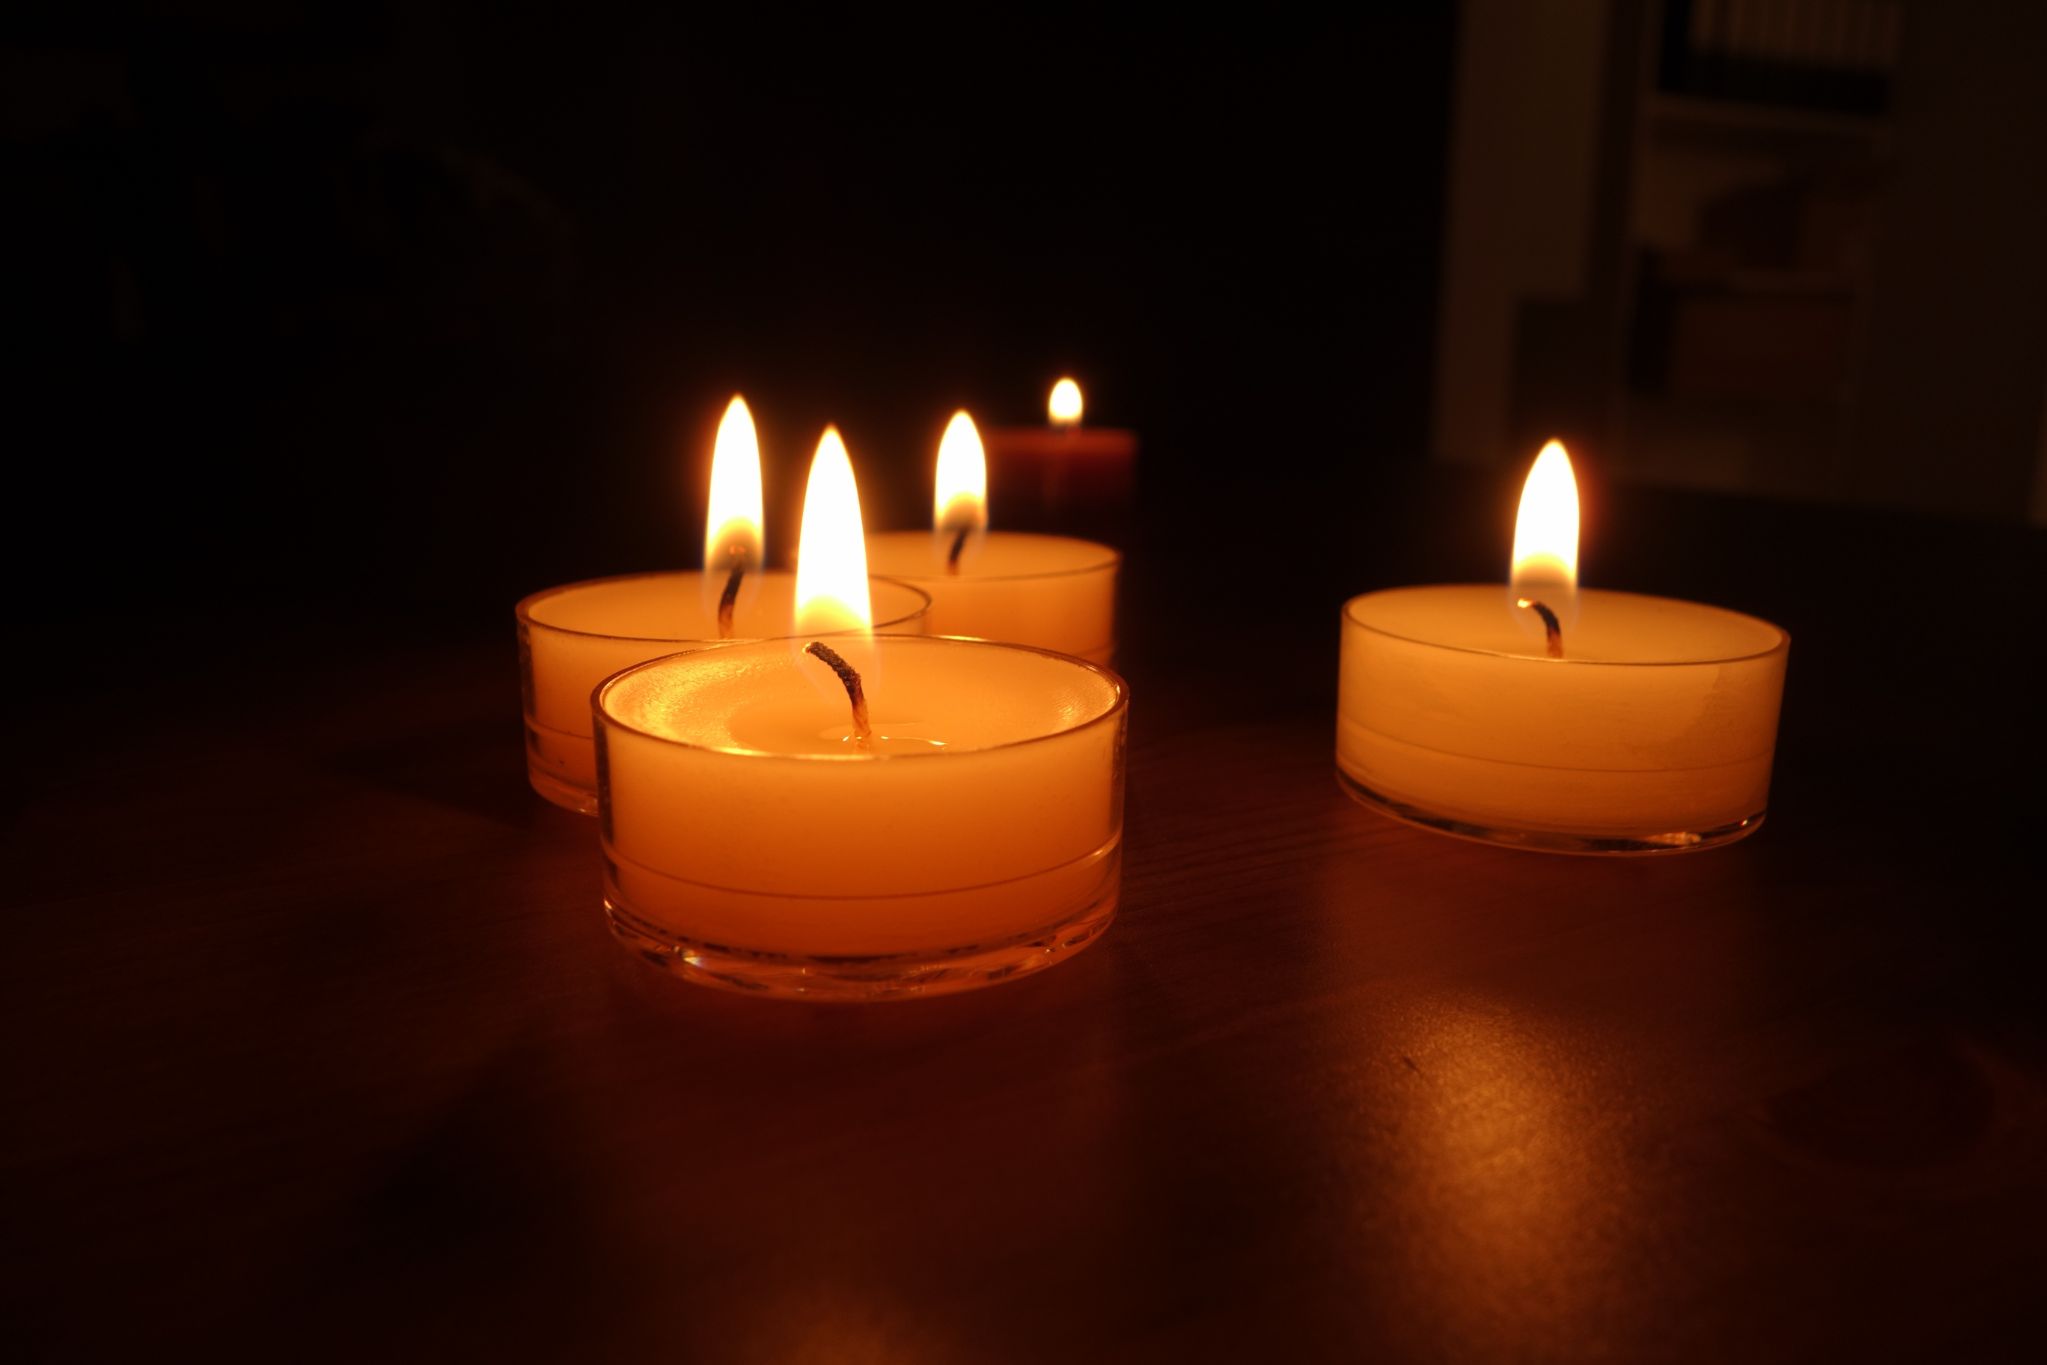 Candles help to create an atmosphere of peace for some people at the end of their life (Credit: Pixabay.com)